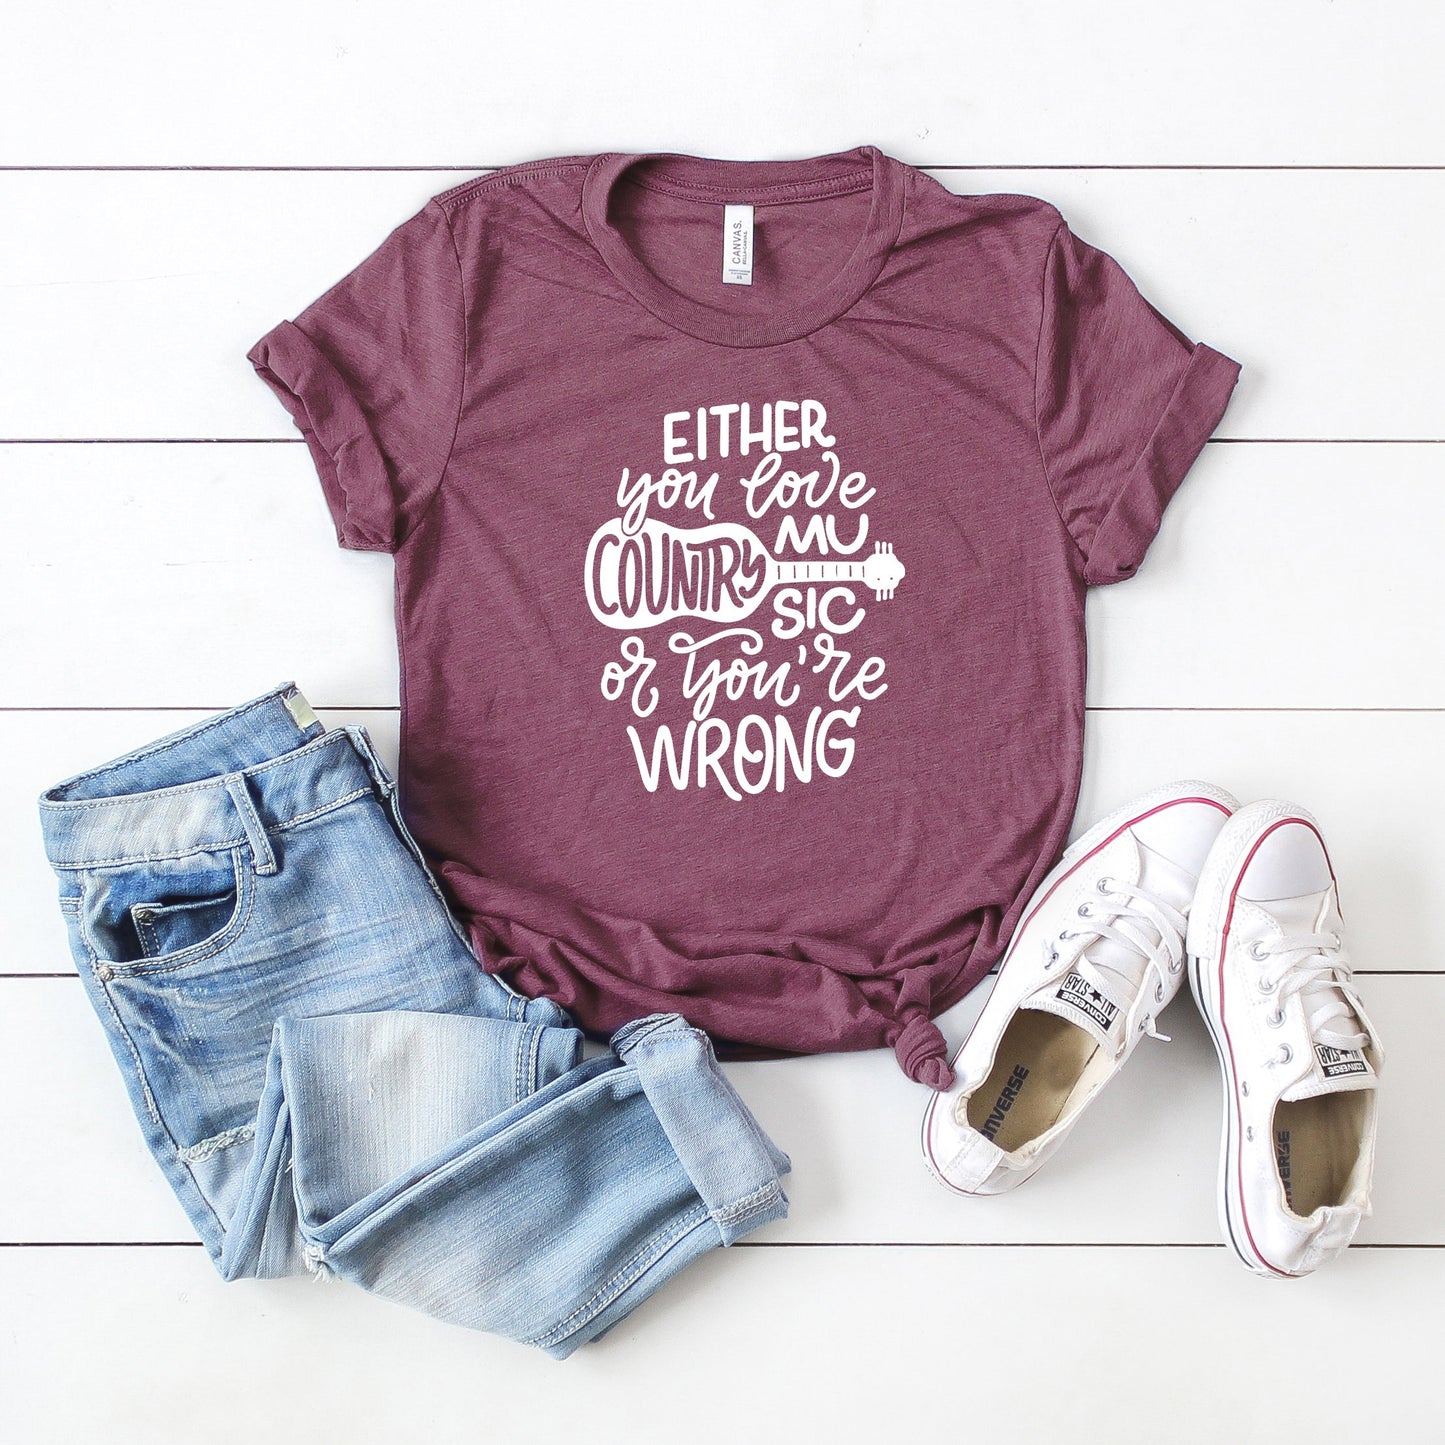 Love Country Music | Short Sleeve Crew Neck